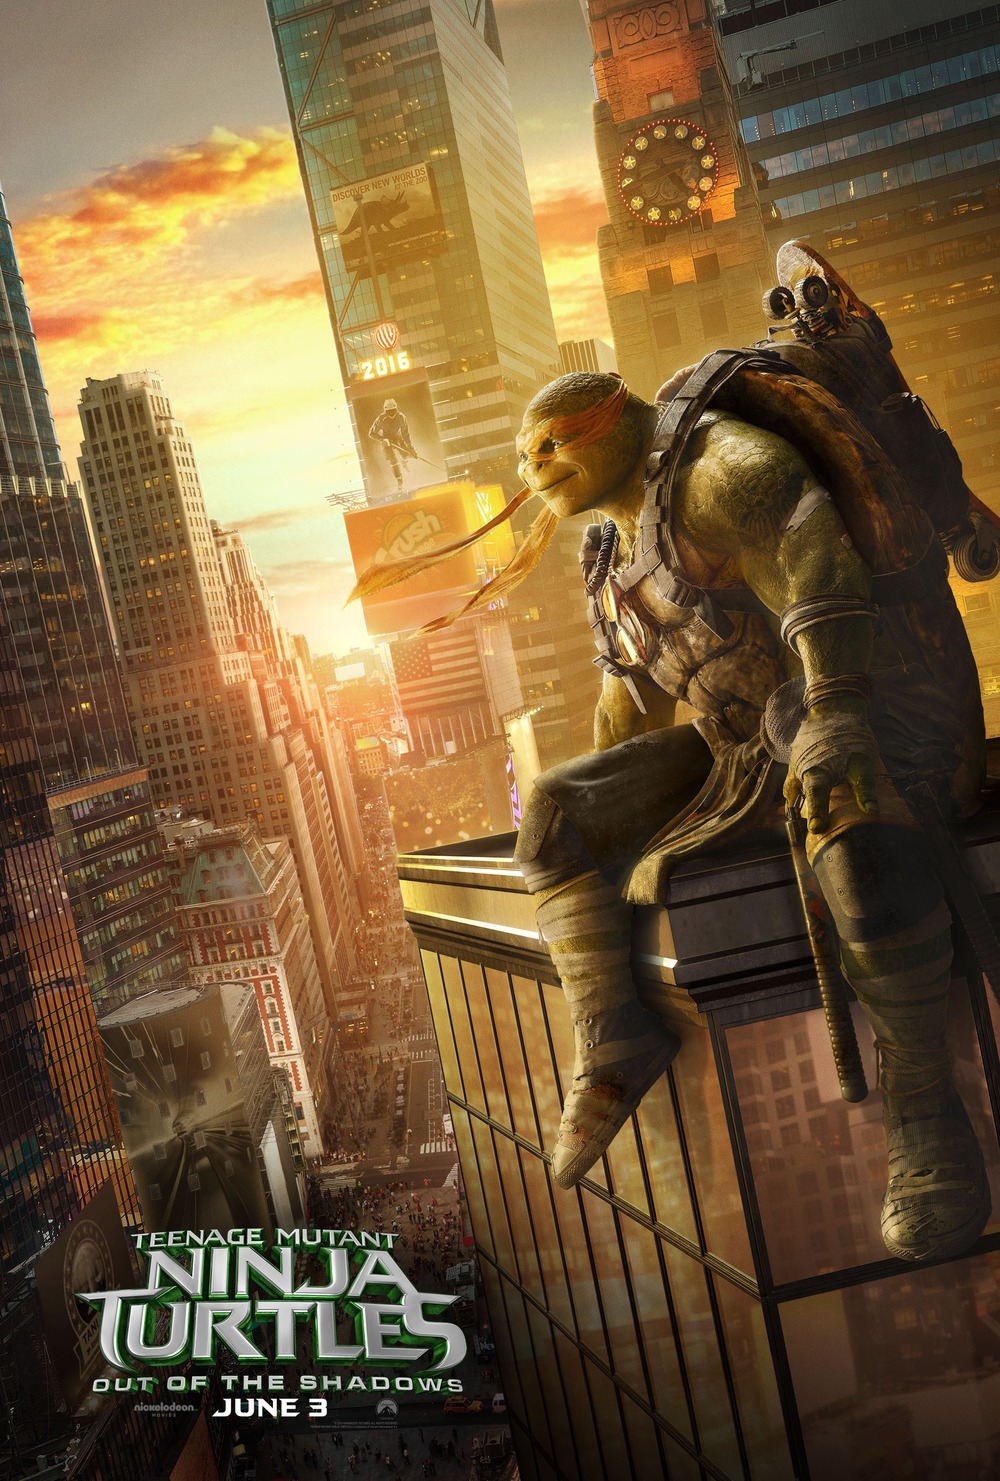 Teenage Mutant Ninja Turtles: Out of the Shadows DVD Release Date